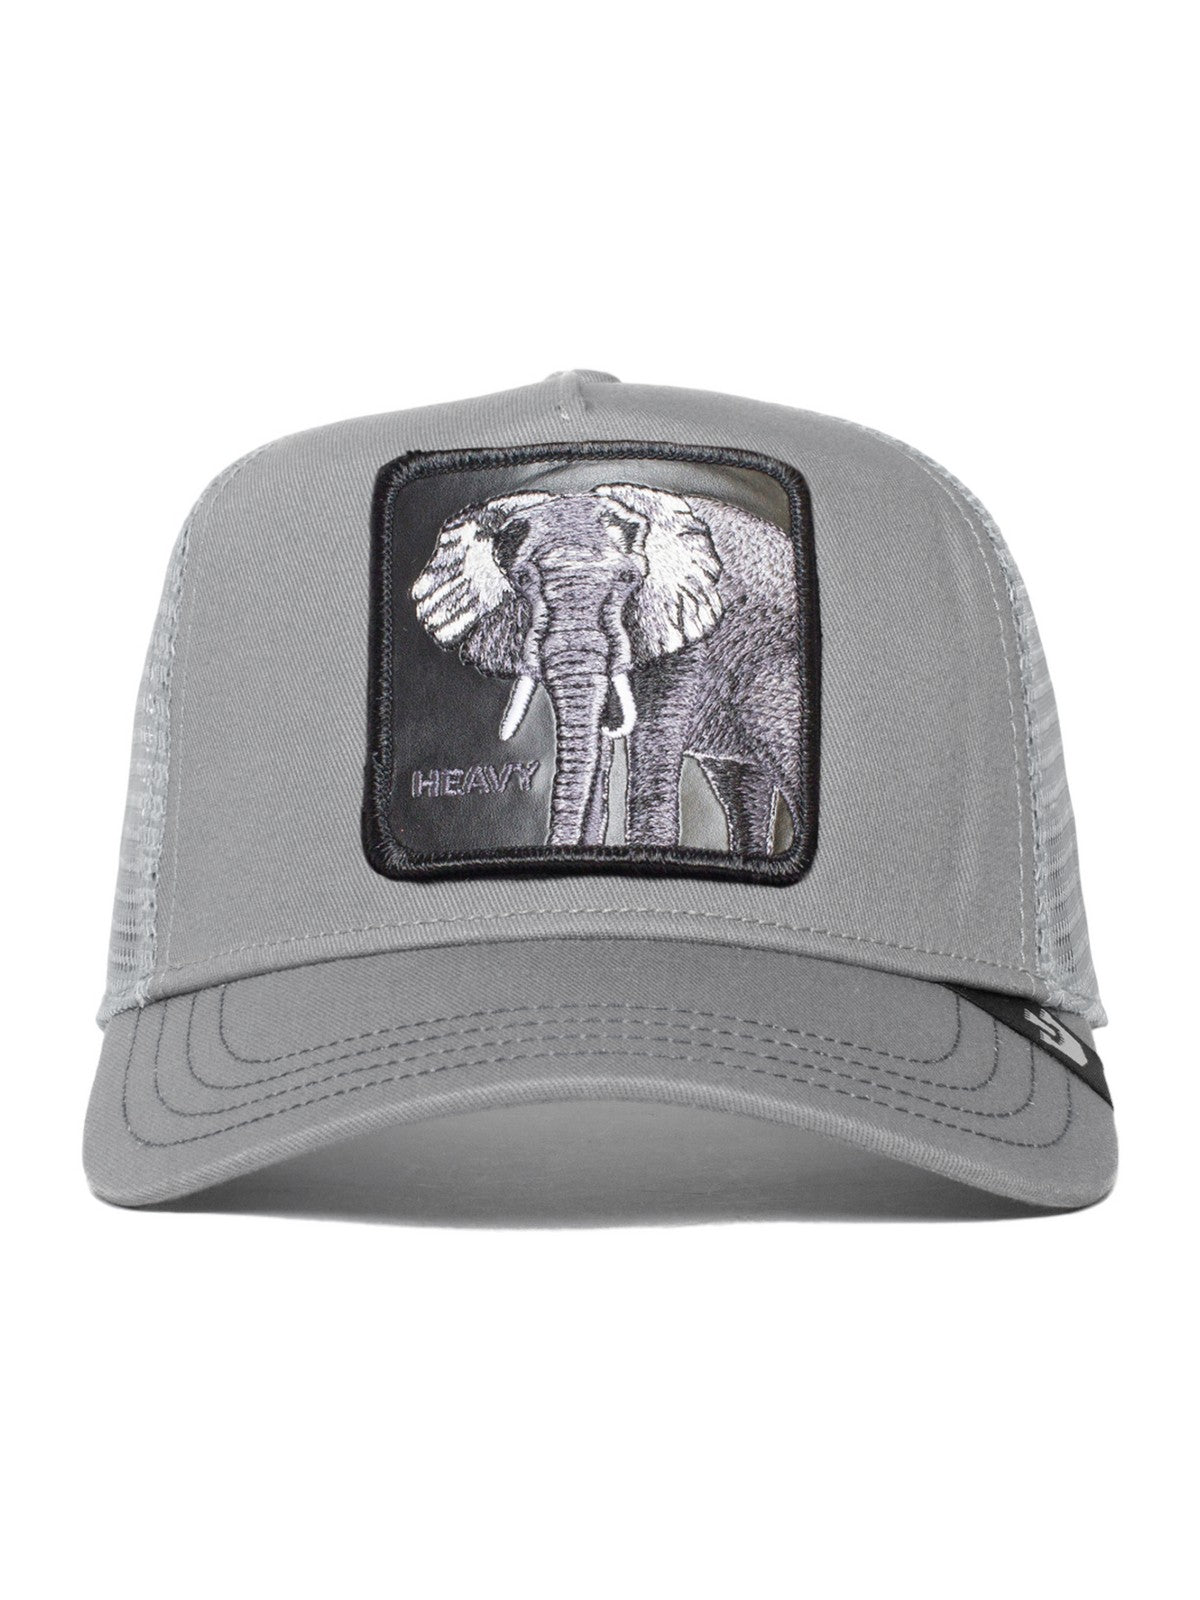 GOORIN BROS Casquette Truckin extra large pour homme 101-1030-GRY Grey